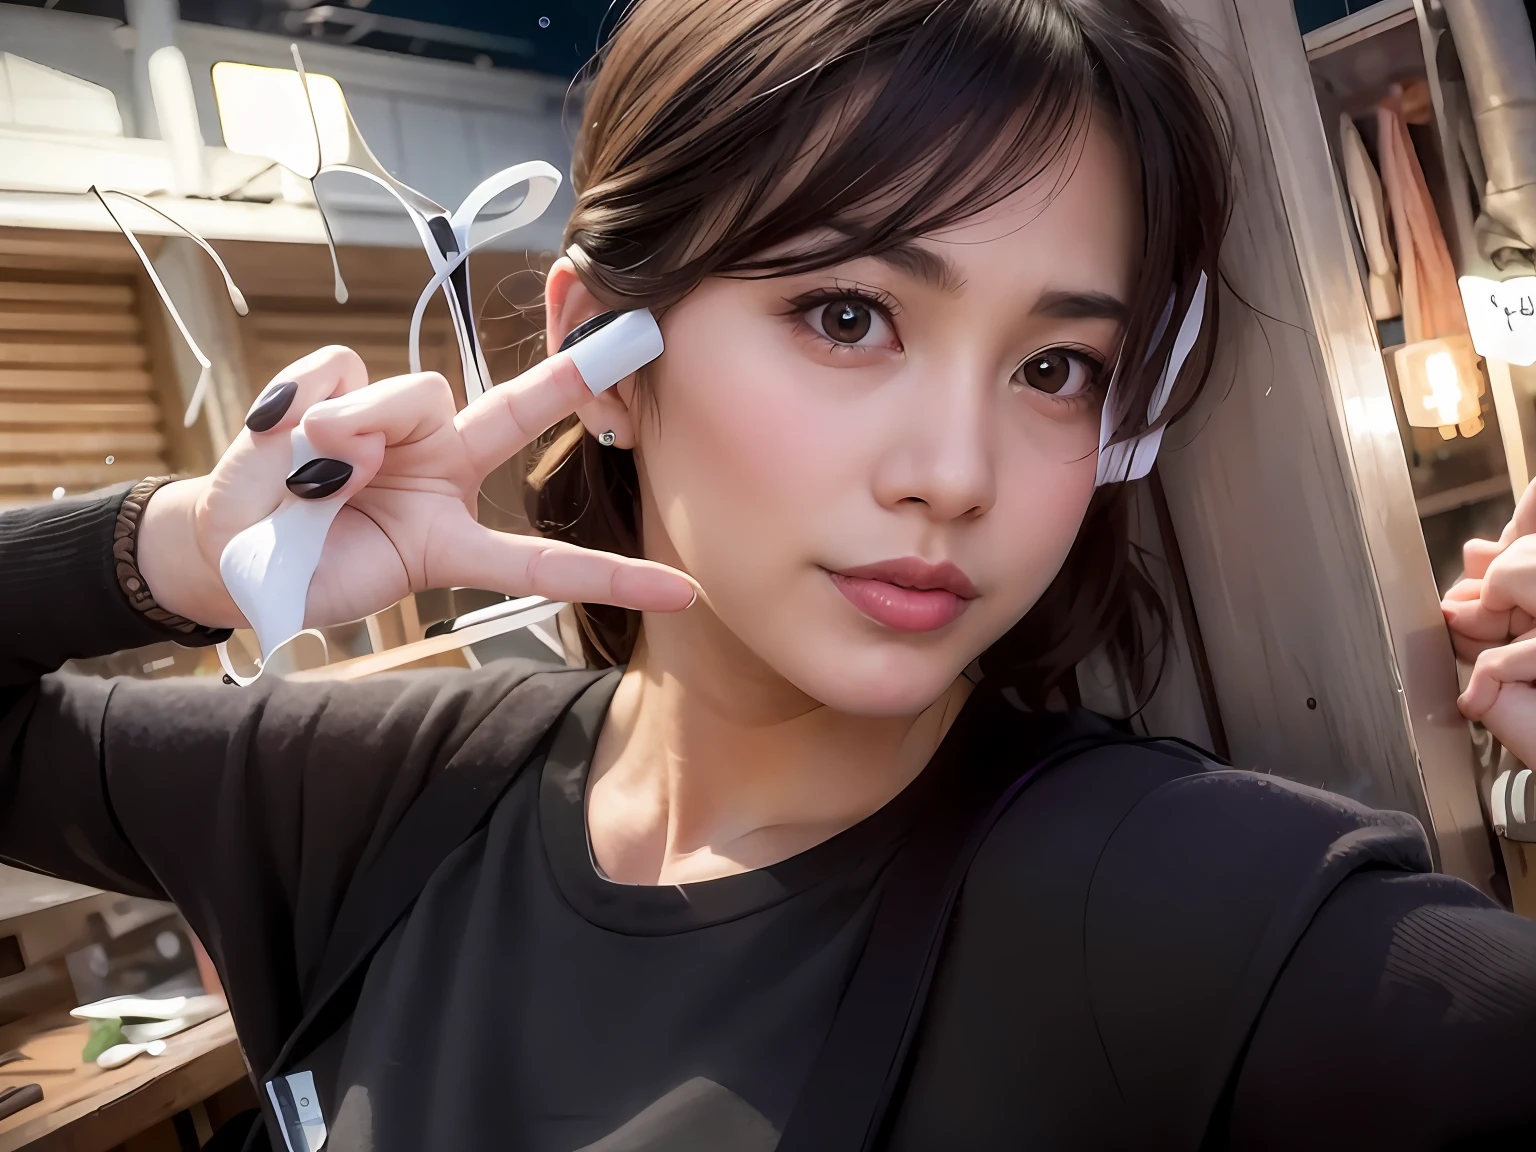 (Extremely detailed Cg Unity 8K wallpaper), (Masterpiece), (Best quality), (Ultra-detailed), (Best Illustration), (Best shadow), (Photorealistic:1.6), Real human skin, Lens flare, Shade, back lit lighting, full bloom, Depth of field, Natural lighting, hardfocus, filmgrain, Look at the viewer, Asian, Kpop idol:1.2, mix4, 1 girl, 21 I, Solo, Skinny, Pale skin, Soft lips, (light eyebrows:1.4),Shiny brown eyes, Black straight hair, Small breasts, Beautiful detailed sky, street(crowd:1.2), Night, (nose blush),  Beautiful detailed eyes, White Japanese school uniform, Sailor suit, Black pleated skirt, Stockings, Sneakers, cheerfulness, Smile